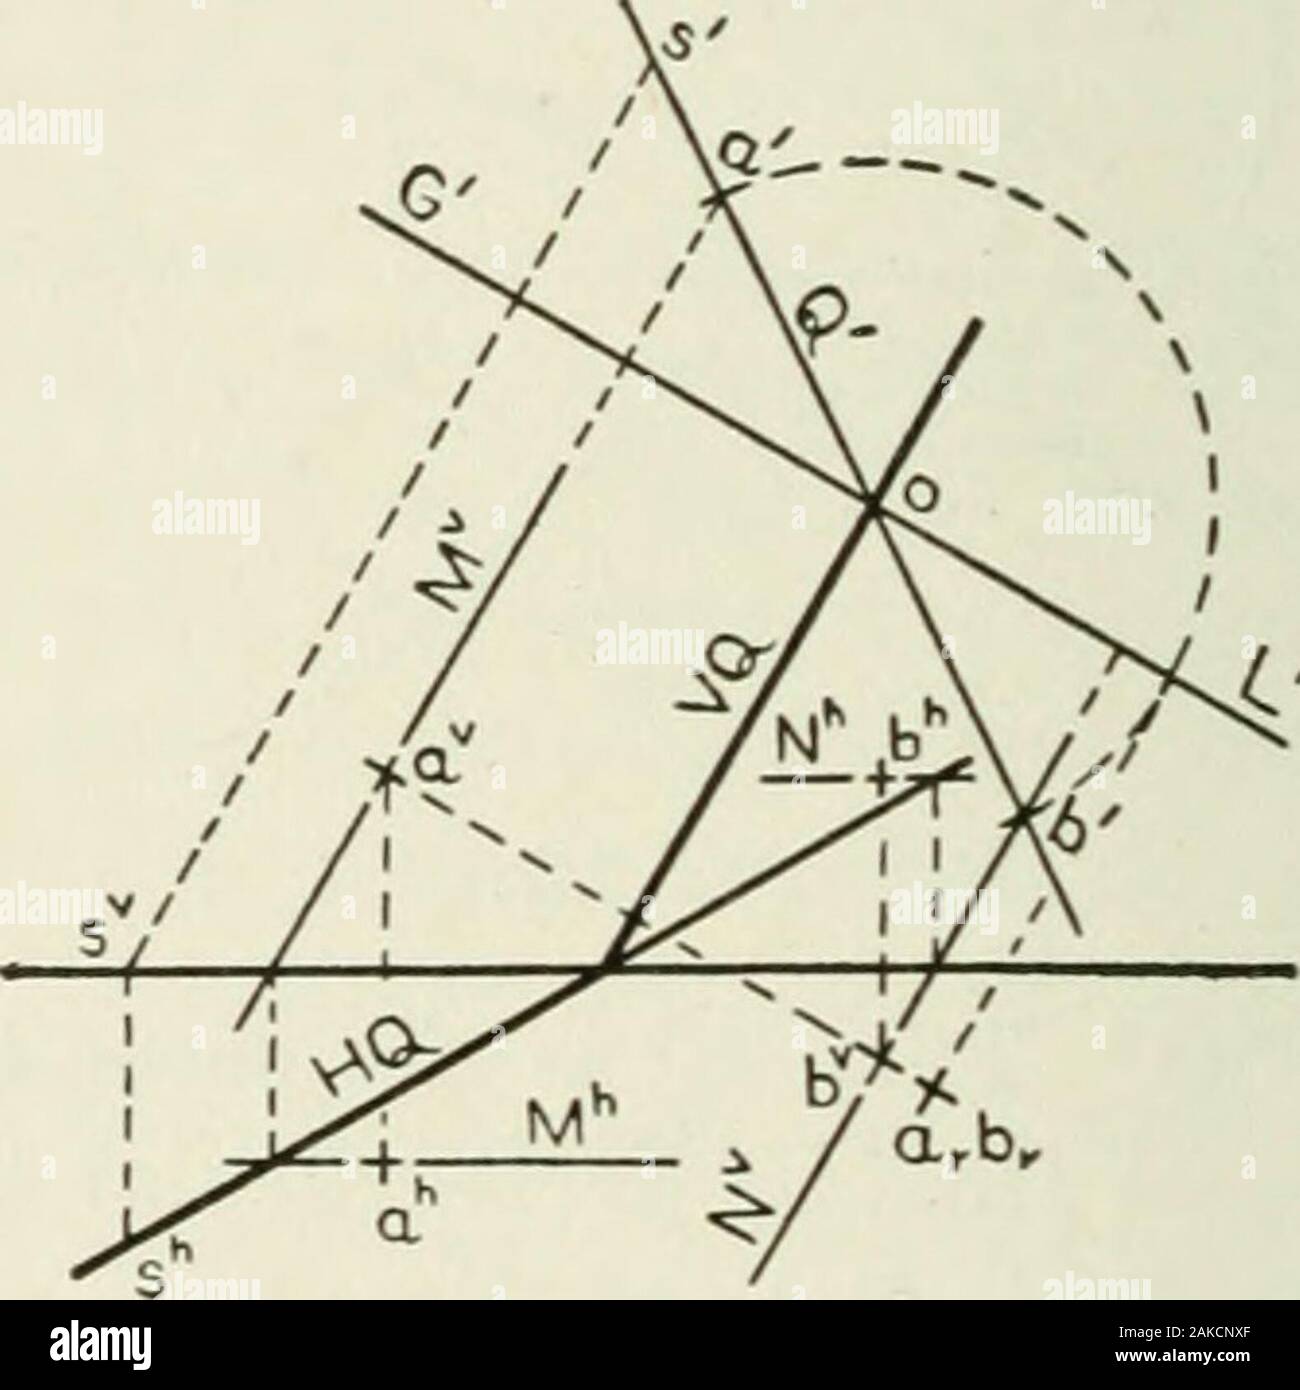 Descriptive geometry . volved position to GXLU revolve abouto to bxv, which lies in V{Q produced below GXLX. Then pro-ceed as for the point a. As before, there is a cheek on theconstruction ; the distance from b to GL equals the distancefrom bx to GXLX. 166 DESCRIPTIVE GEOMETRY [XVII, Â§ 147 Note. The student does not always see readily why the F-projectionsav and bv should be located by means of auxiliary lines in the plane Q,since the distances of these points from GL appear at once in the second-ary projection. Indeed, the projections av and bv can be located by trans-ferring from the secon Stock Photo